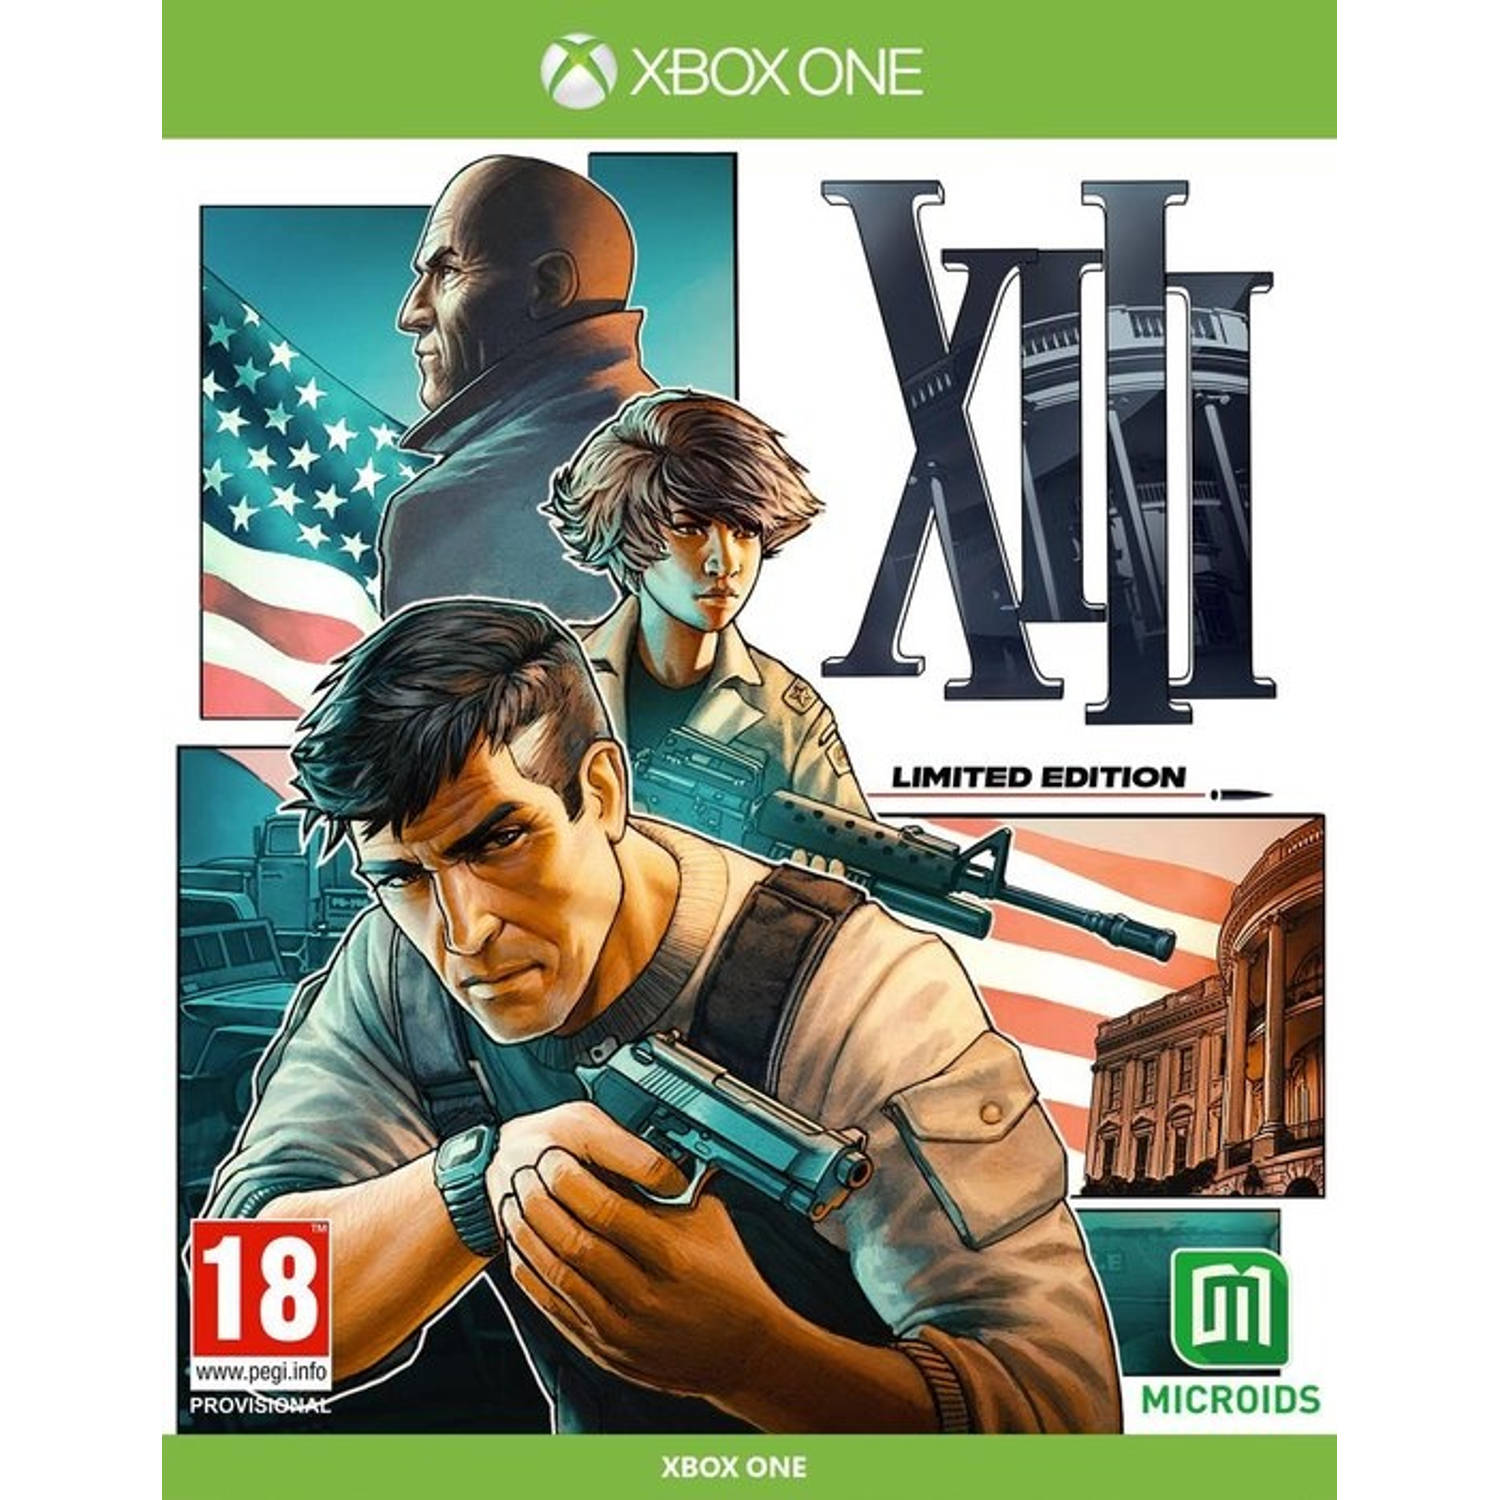 XIII Limted Edition